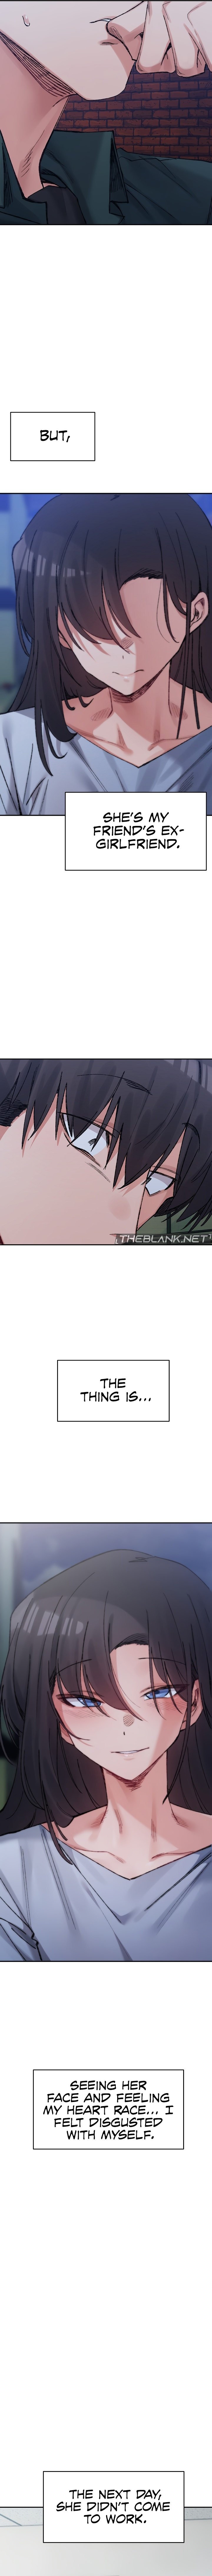 a-delicate-relationship-chap-34-3